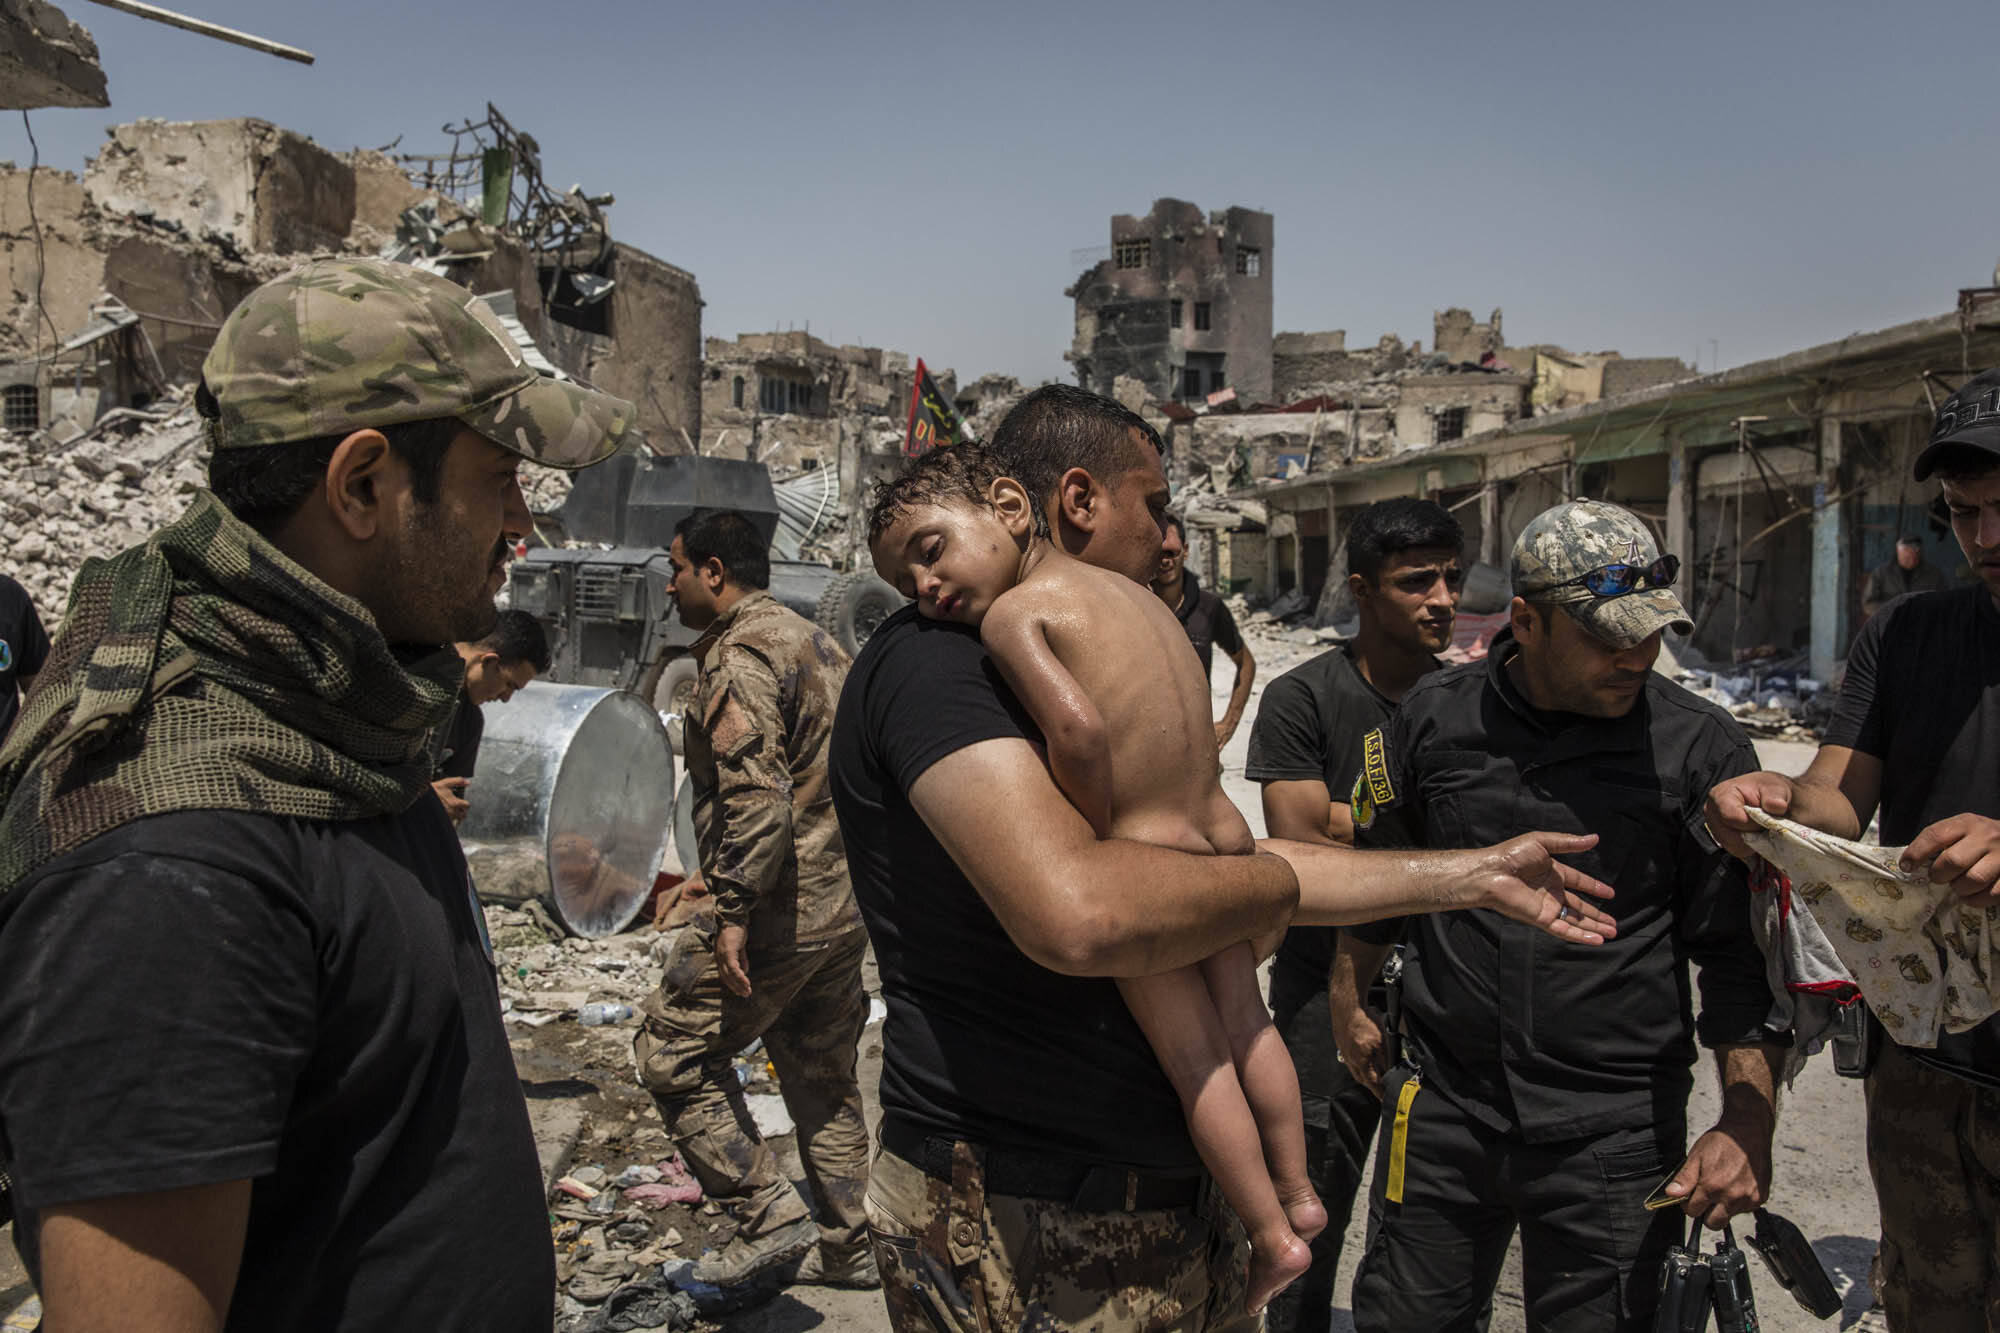  An unidentified young boy who was carried out of the last ISIS controlled area in the Old City, by a man suspected of being a militant, was cared for by Iraqi Special Forces soldiers. Iraq - July 2017 